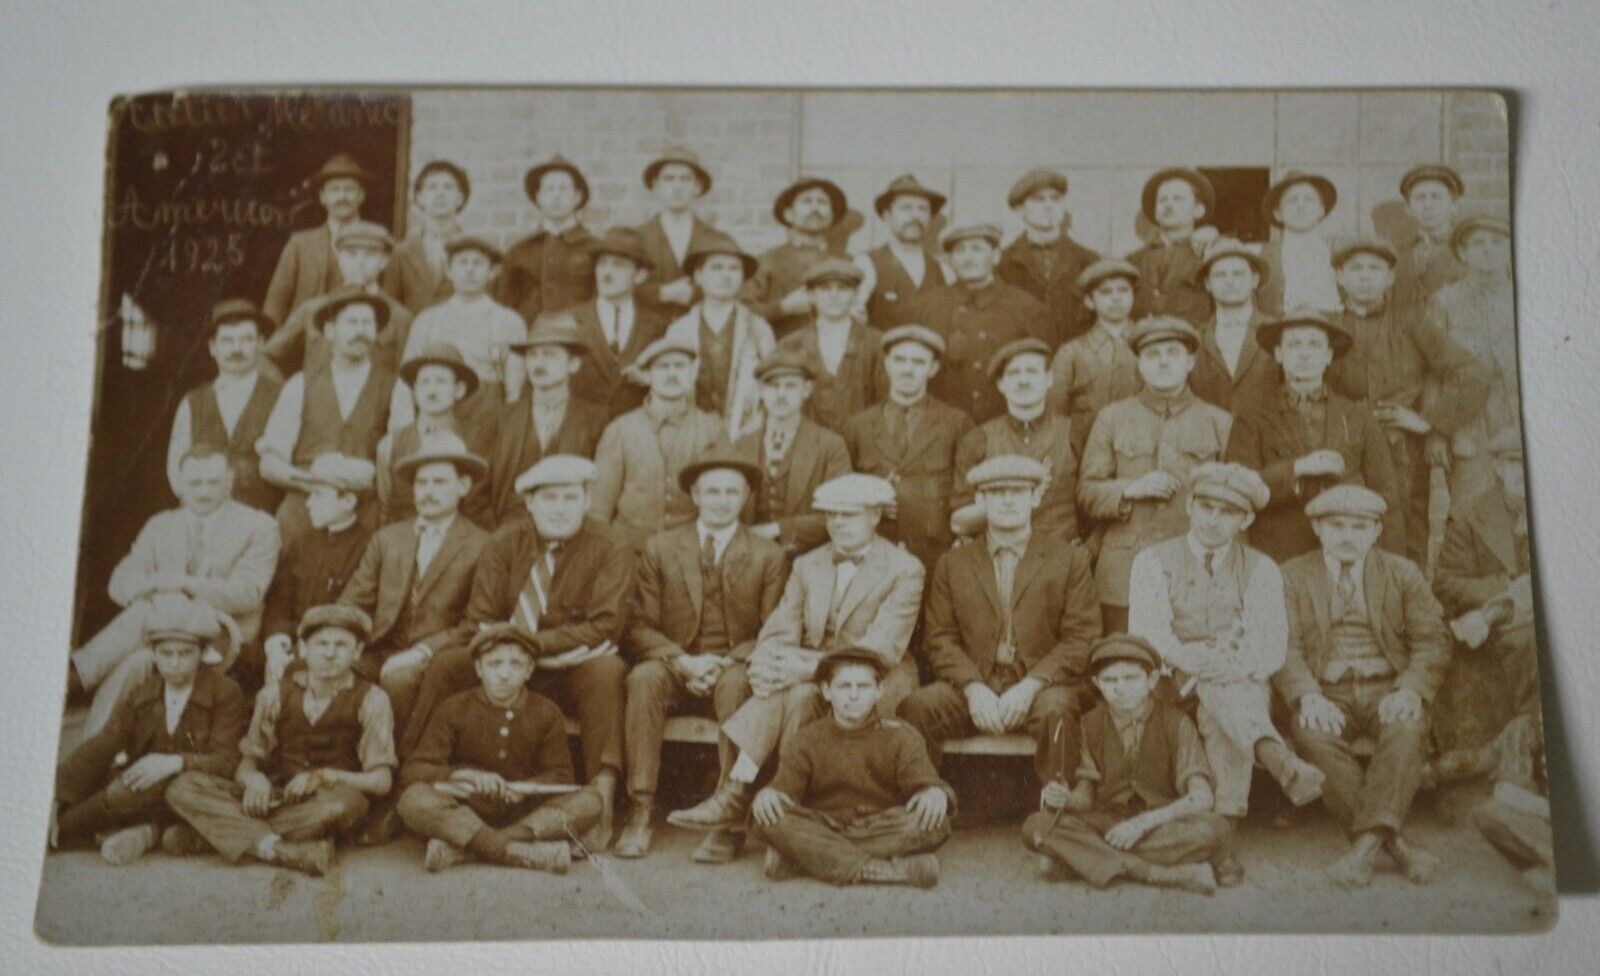 1920s RPPC Postcard Unknown Group of Men 1925 Union? Business?